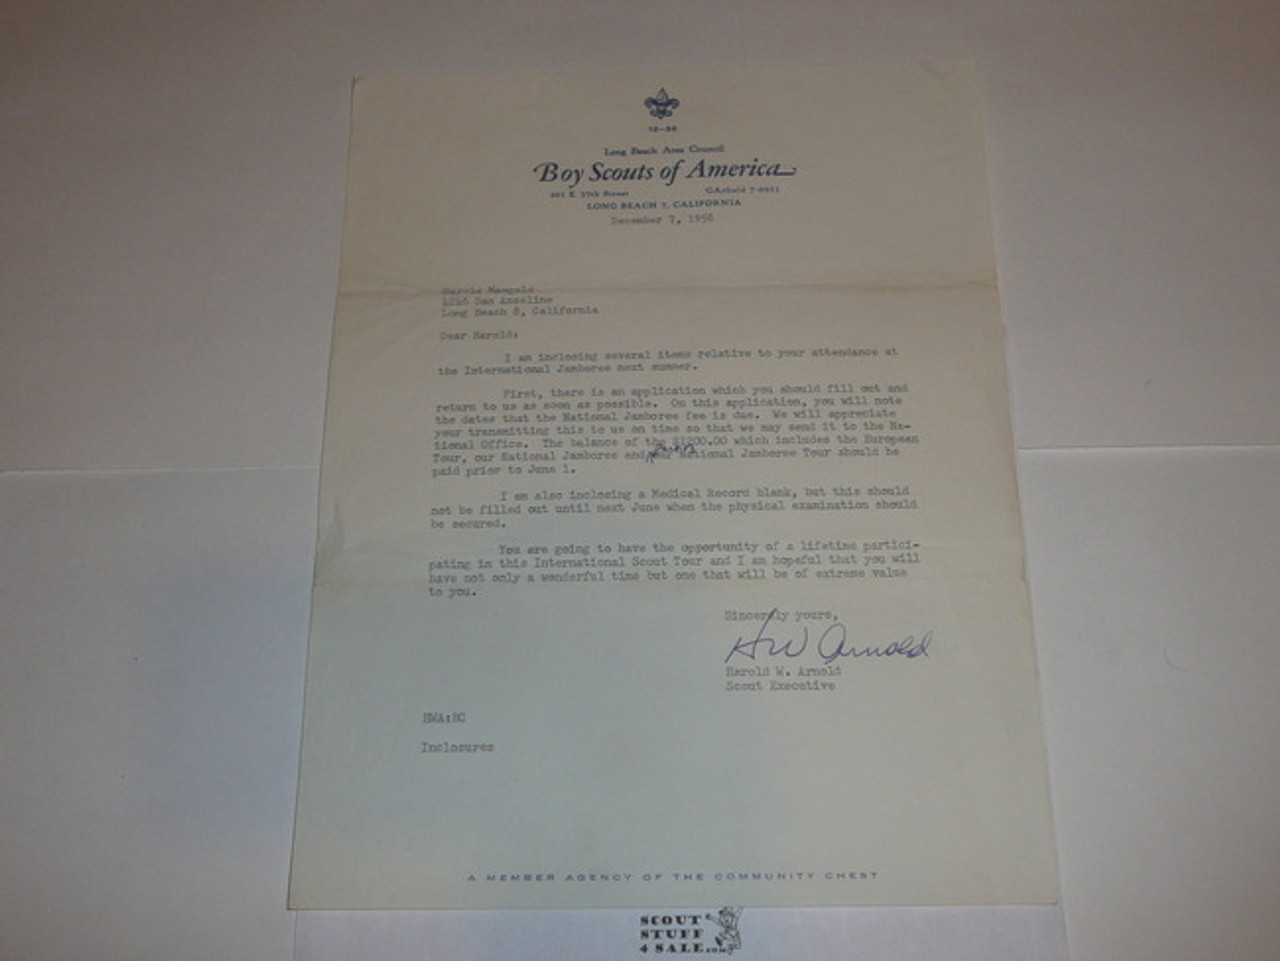 Long Beach Area Council Stationary, 1956 letter from Scout Executive